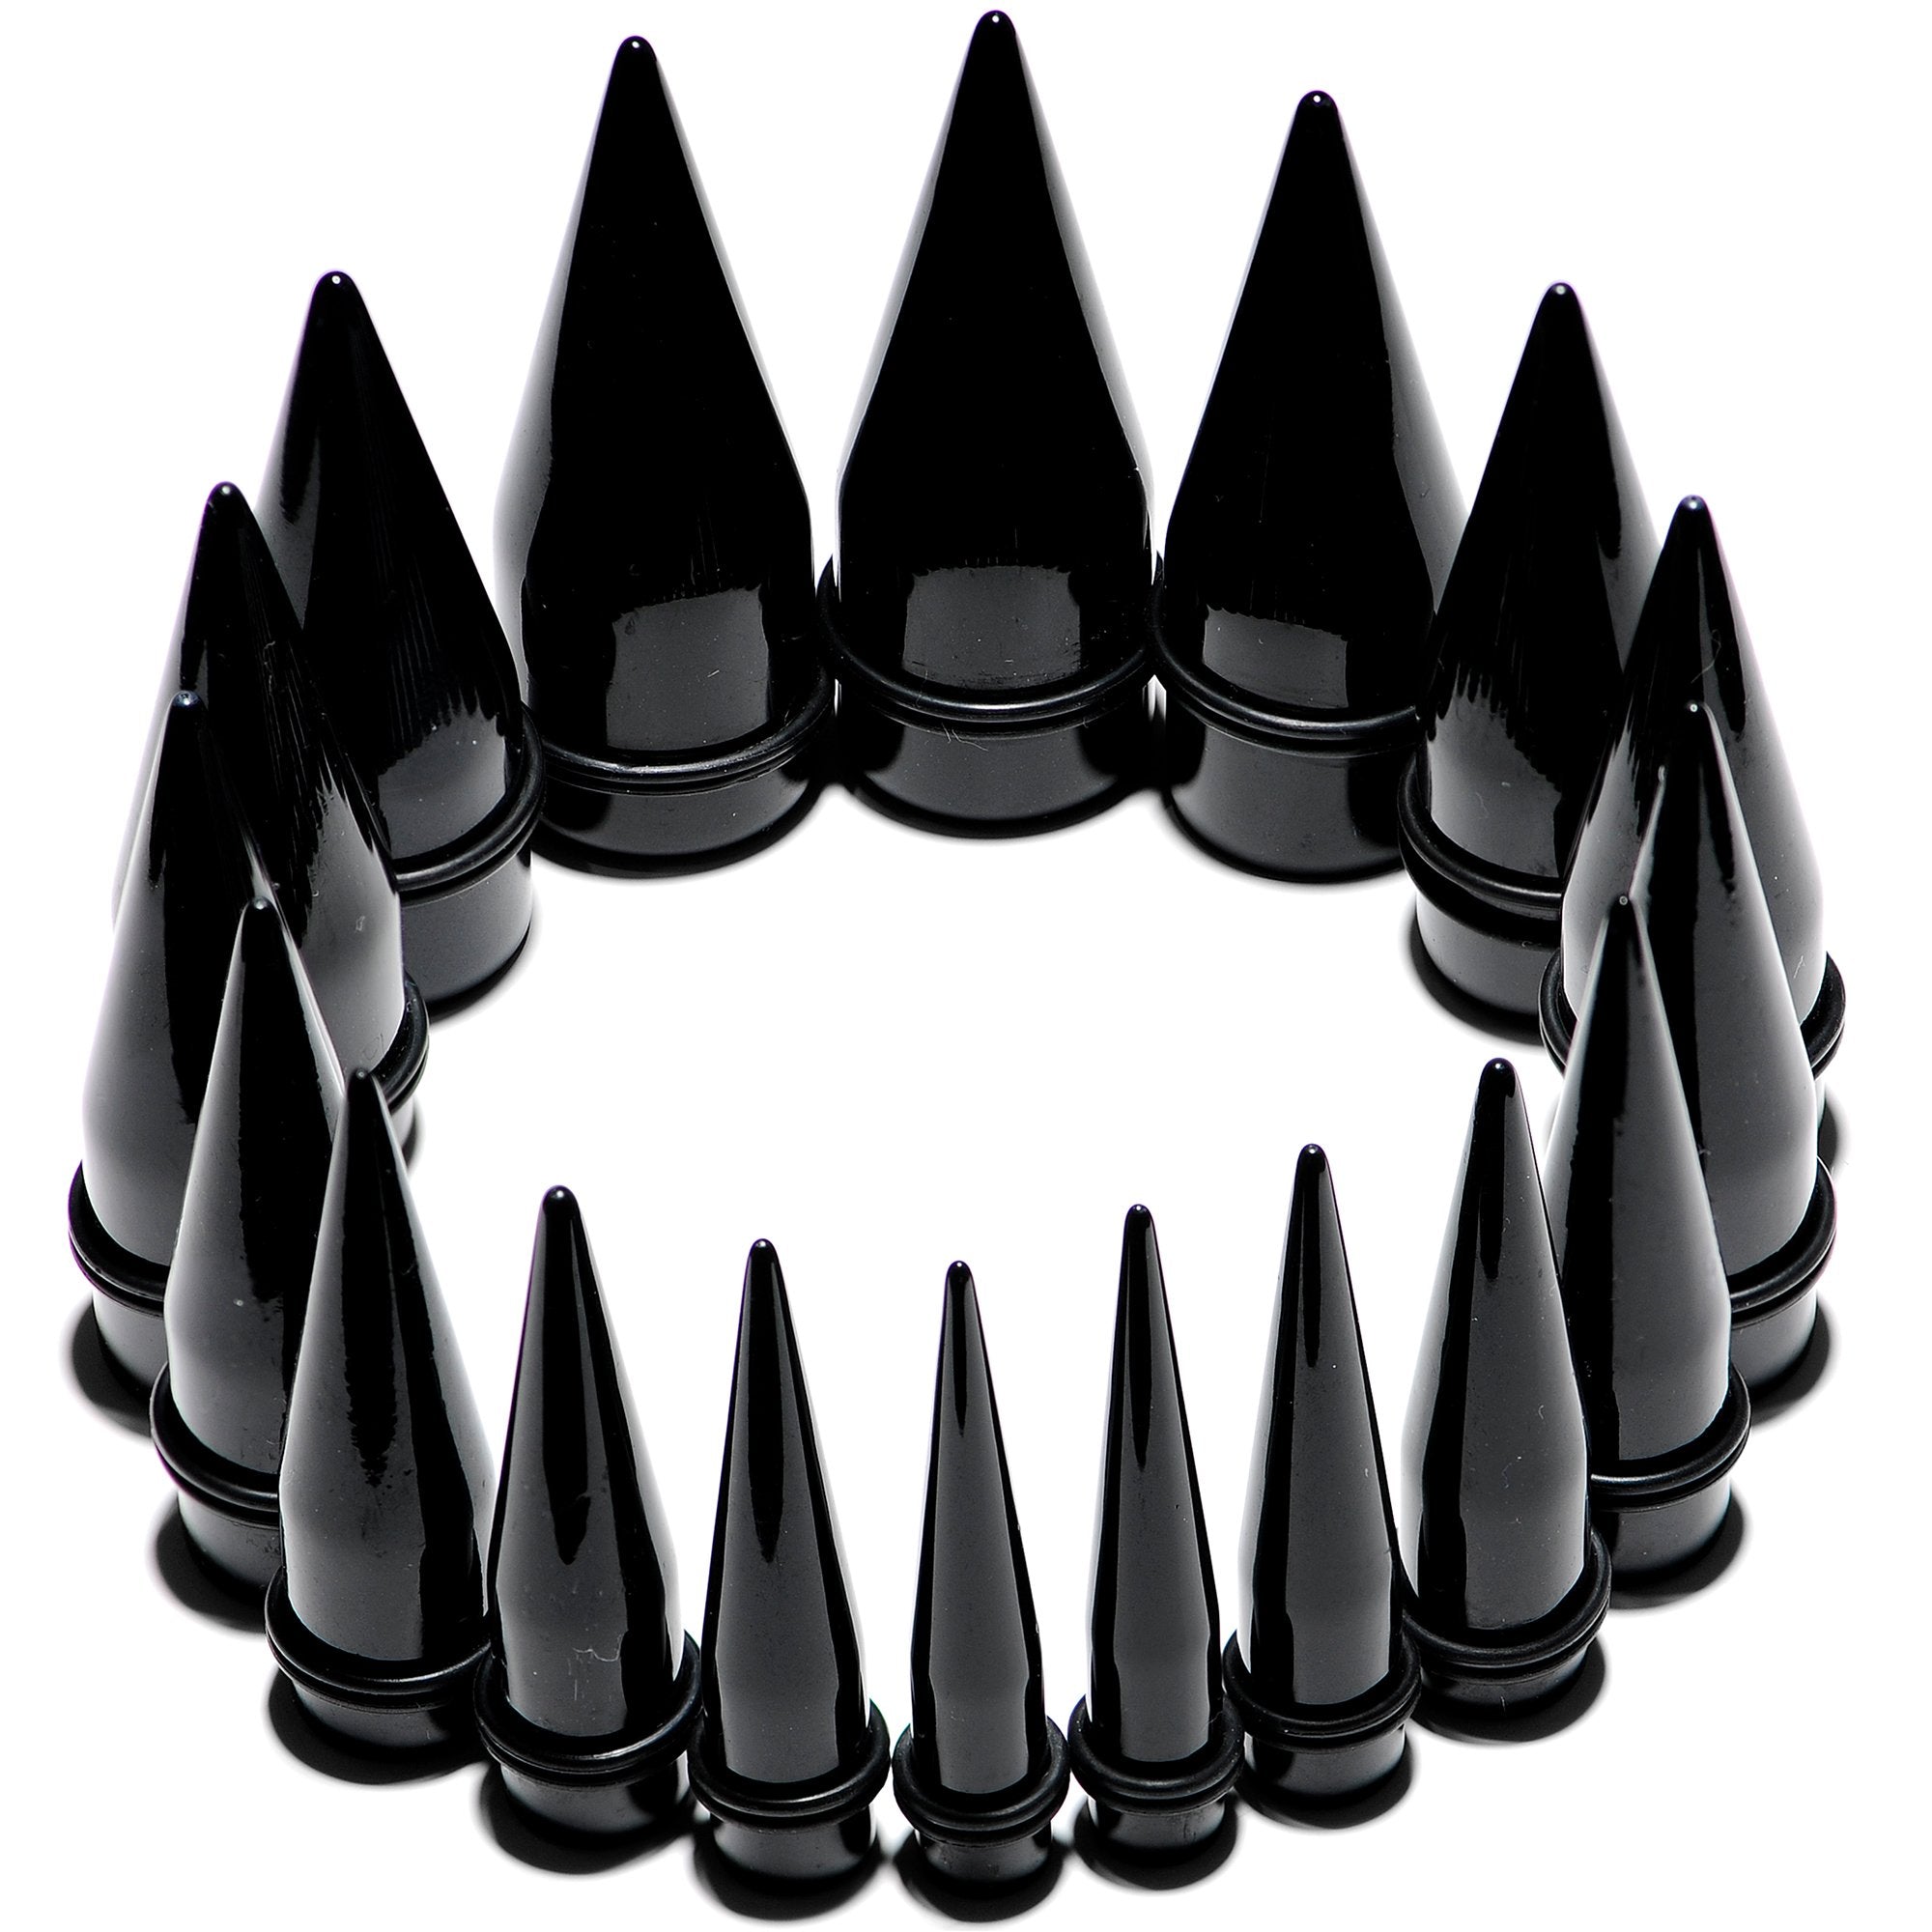 00 Gauge to 1 inch 18 Piece Black Acrylic Ear Stretching Taper Kit